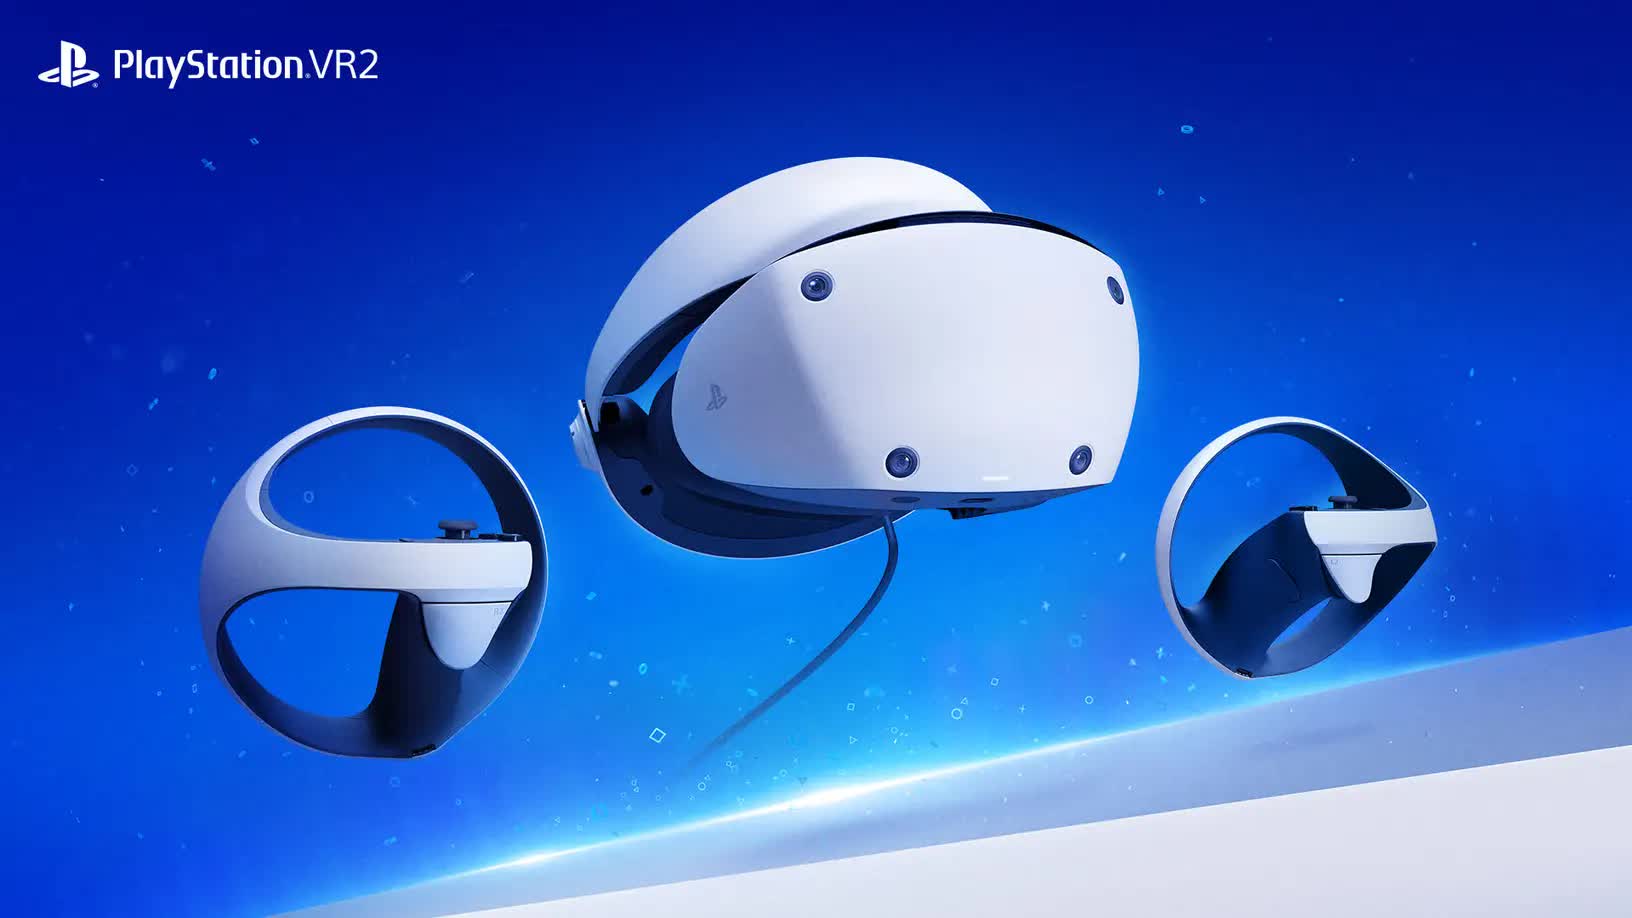 Sony says the PSVR 2 outsold its predecessor during first 6 weeks after launch